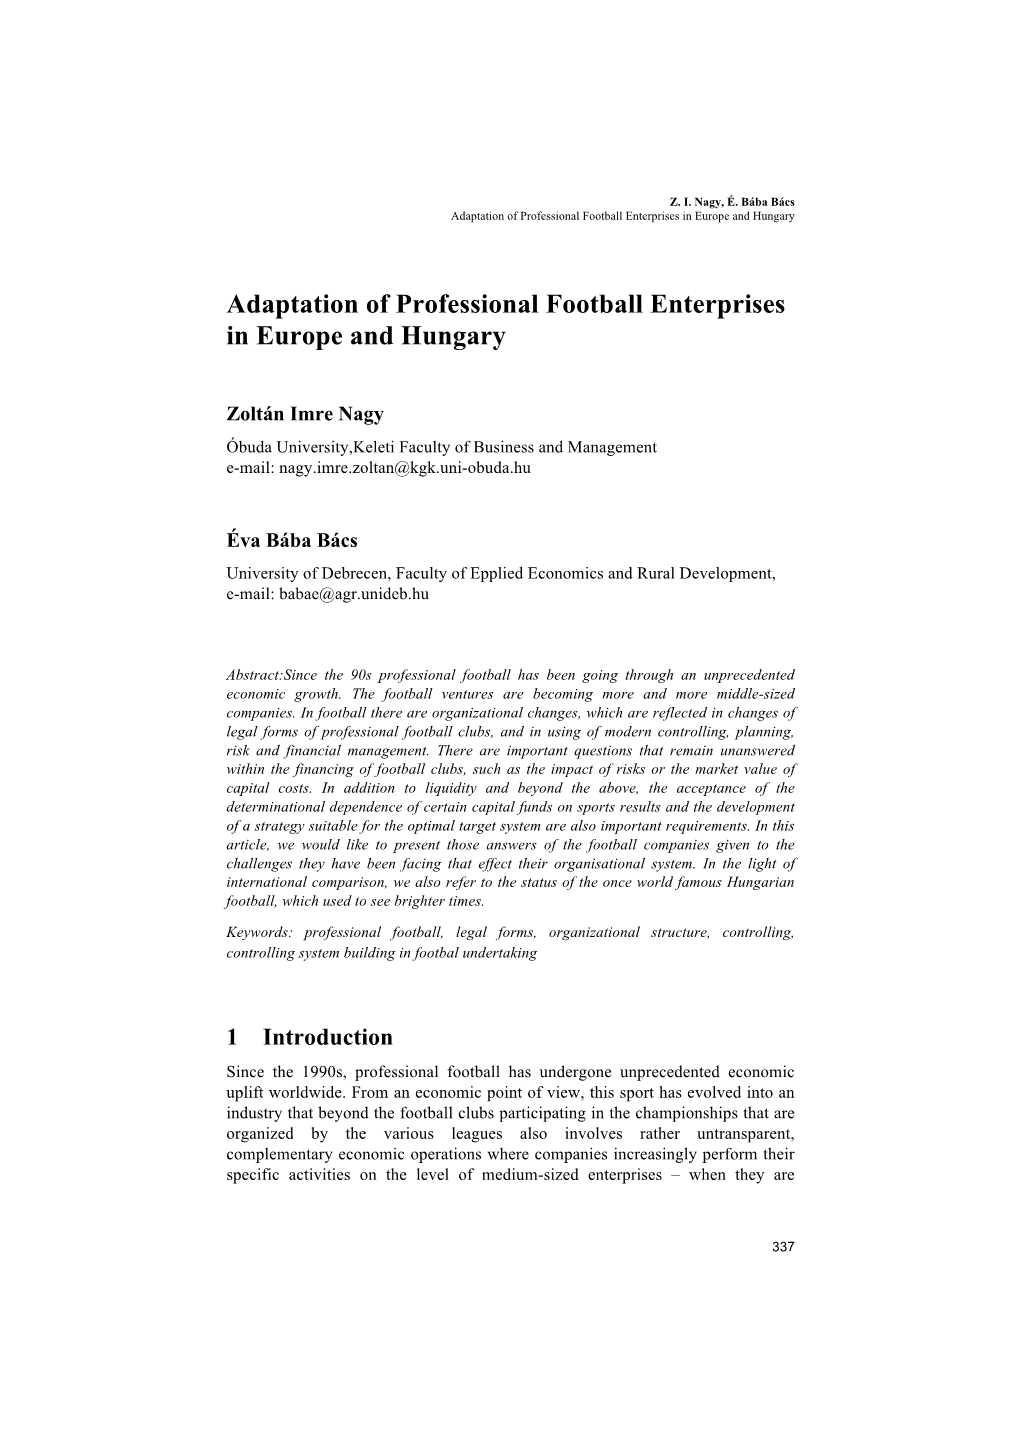 Adaptation of Professional Football Enterprises in Europe and Hungary